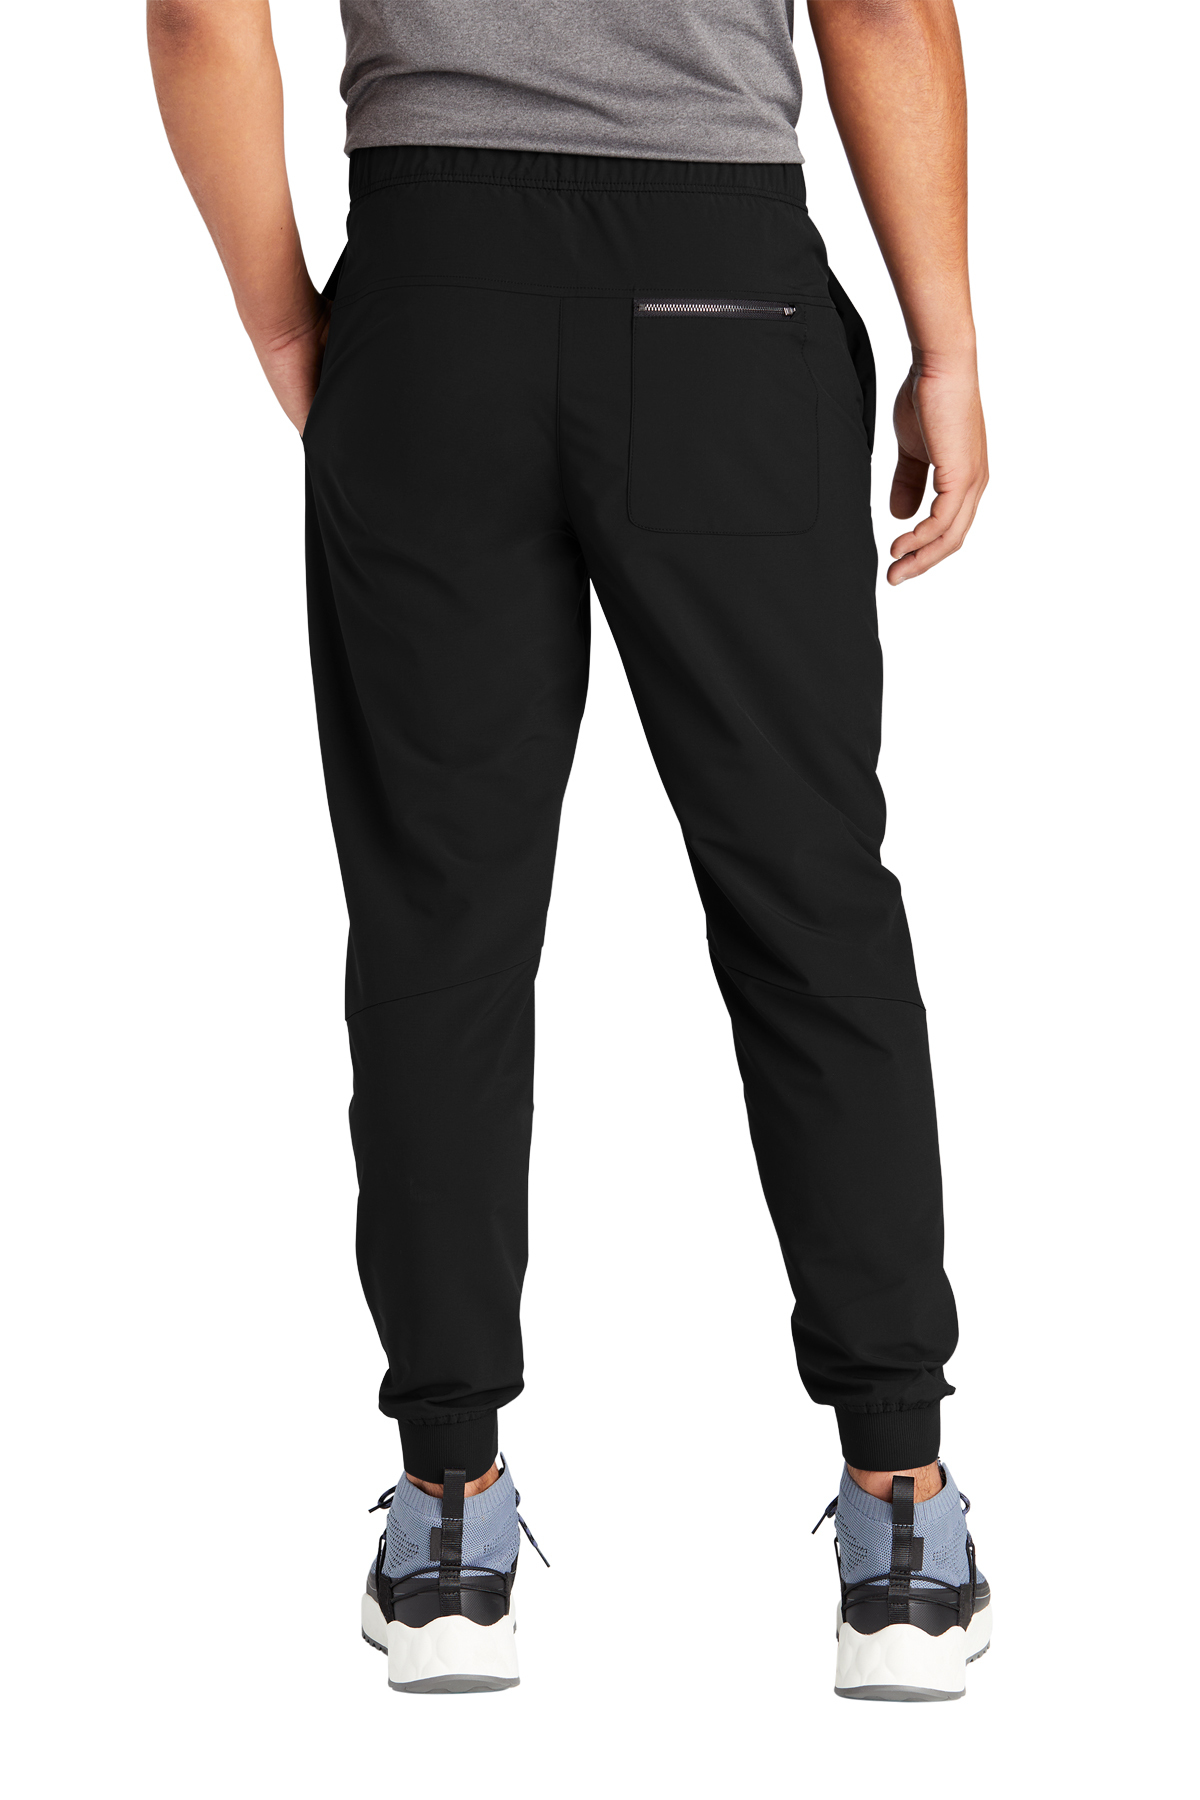 OGIO Connection Jogger | Product | SanMar